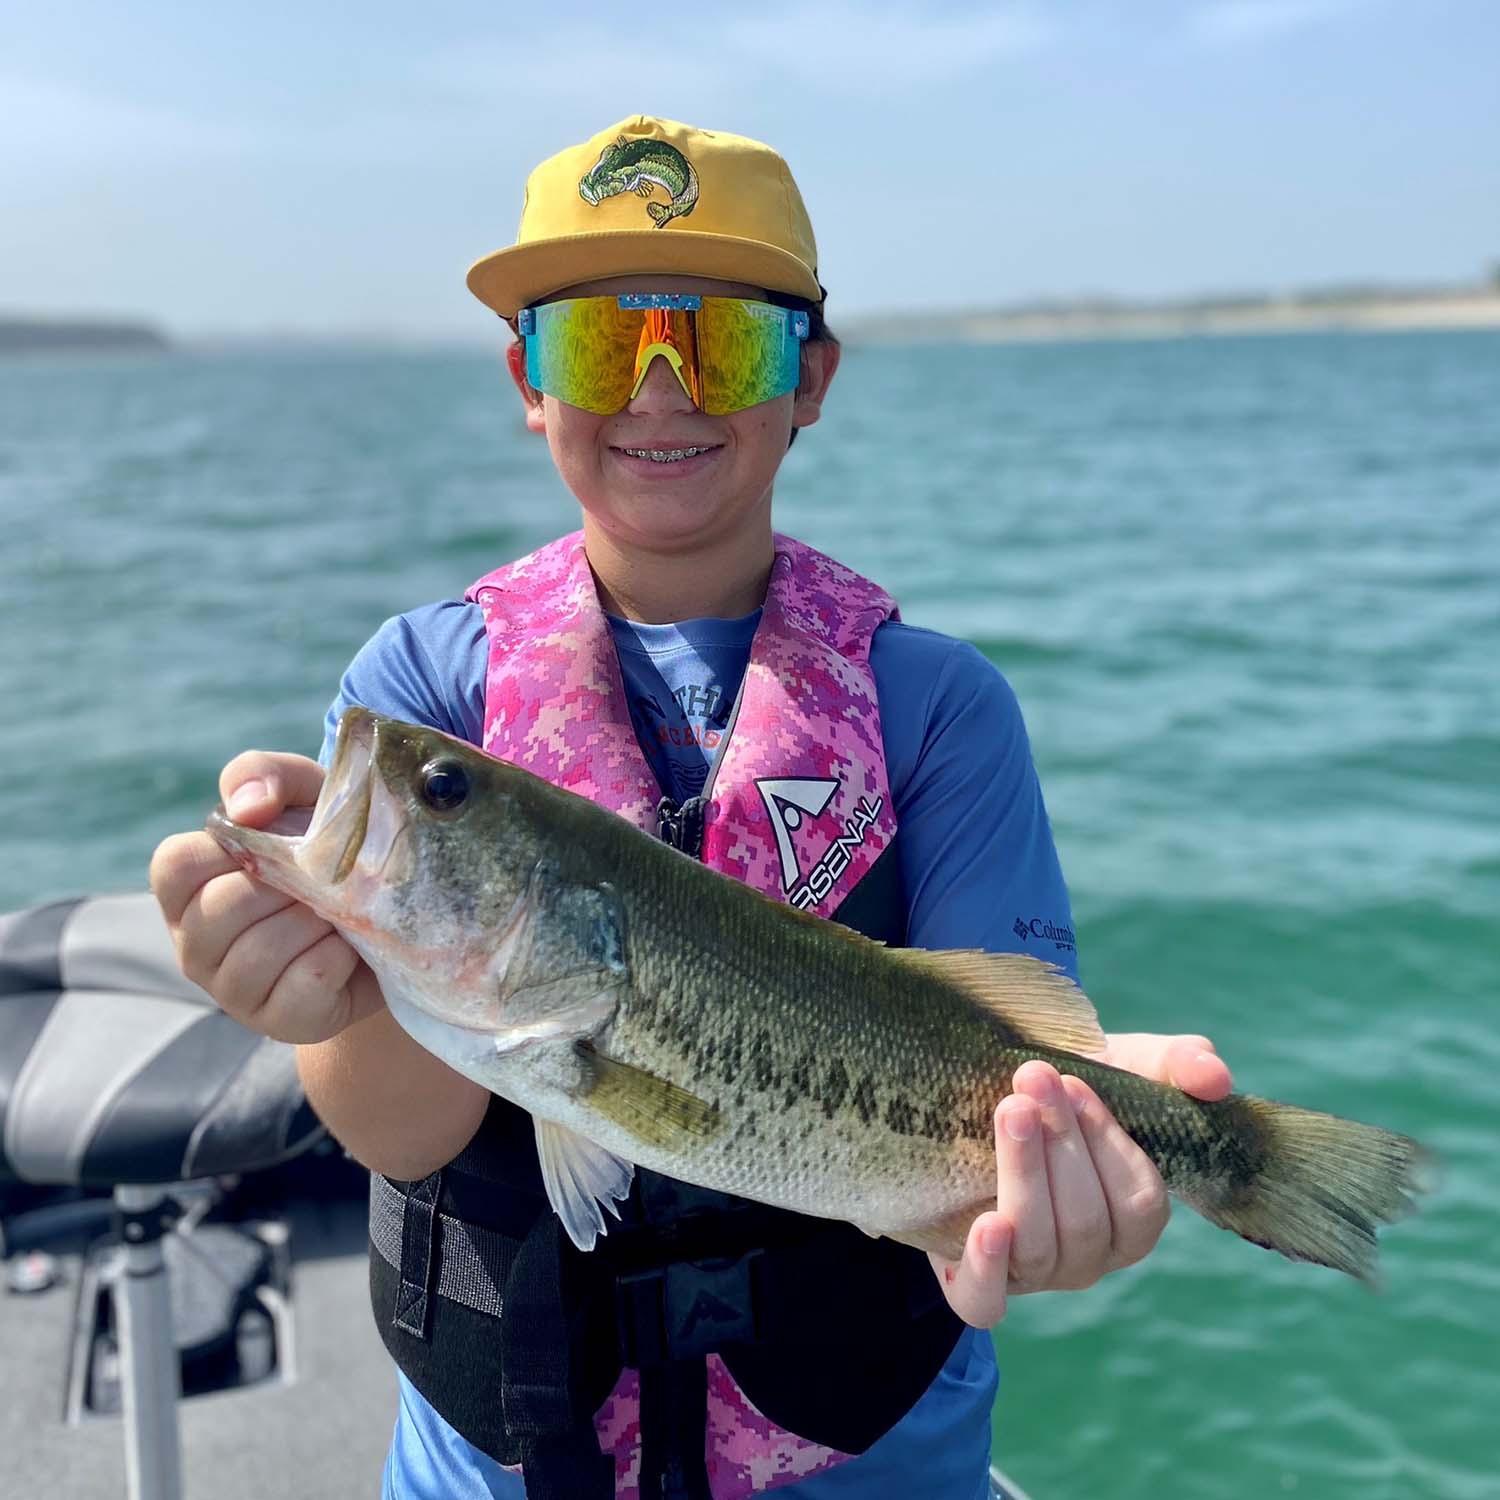 Saturday Morning Fishing Report: Water Temps Hit Low 80's – Mix